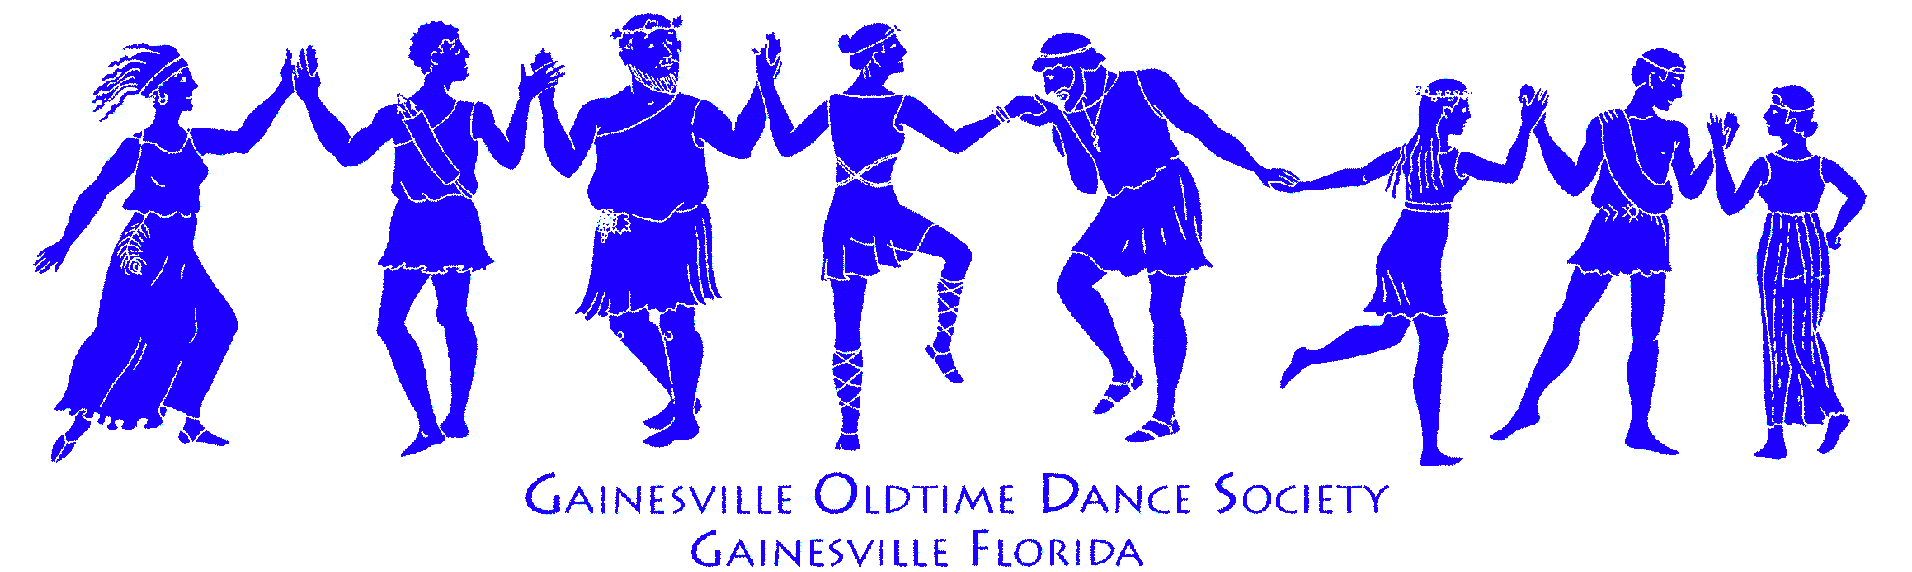 Gainesville Oldtime Dance Society